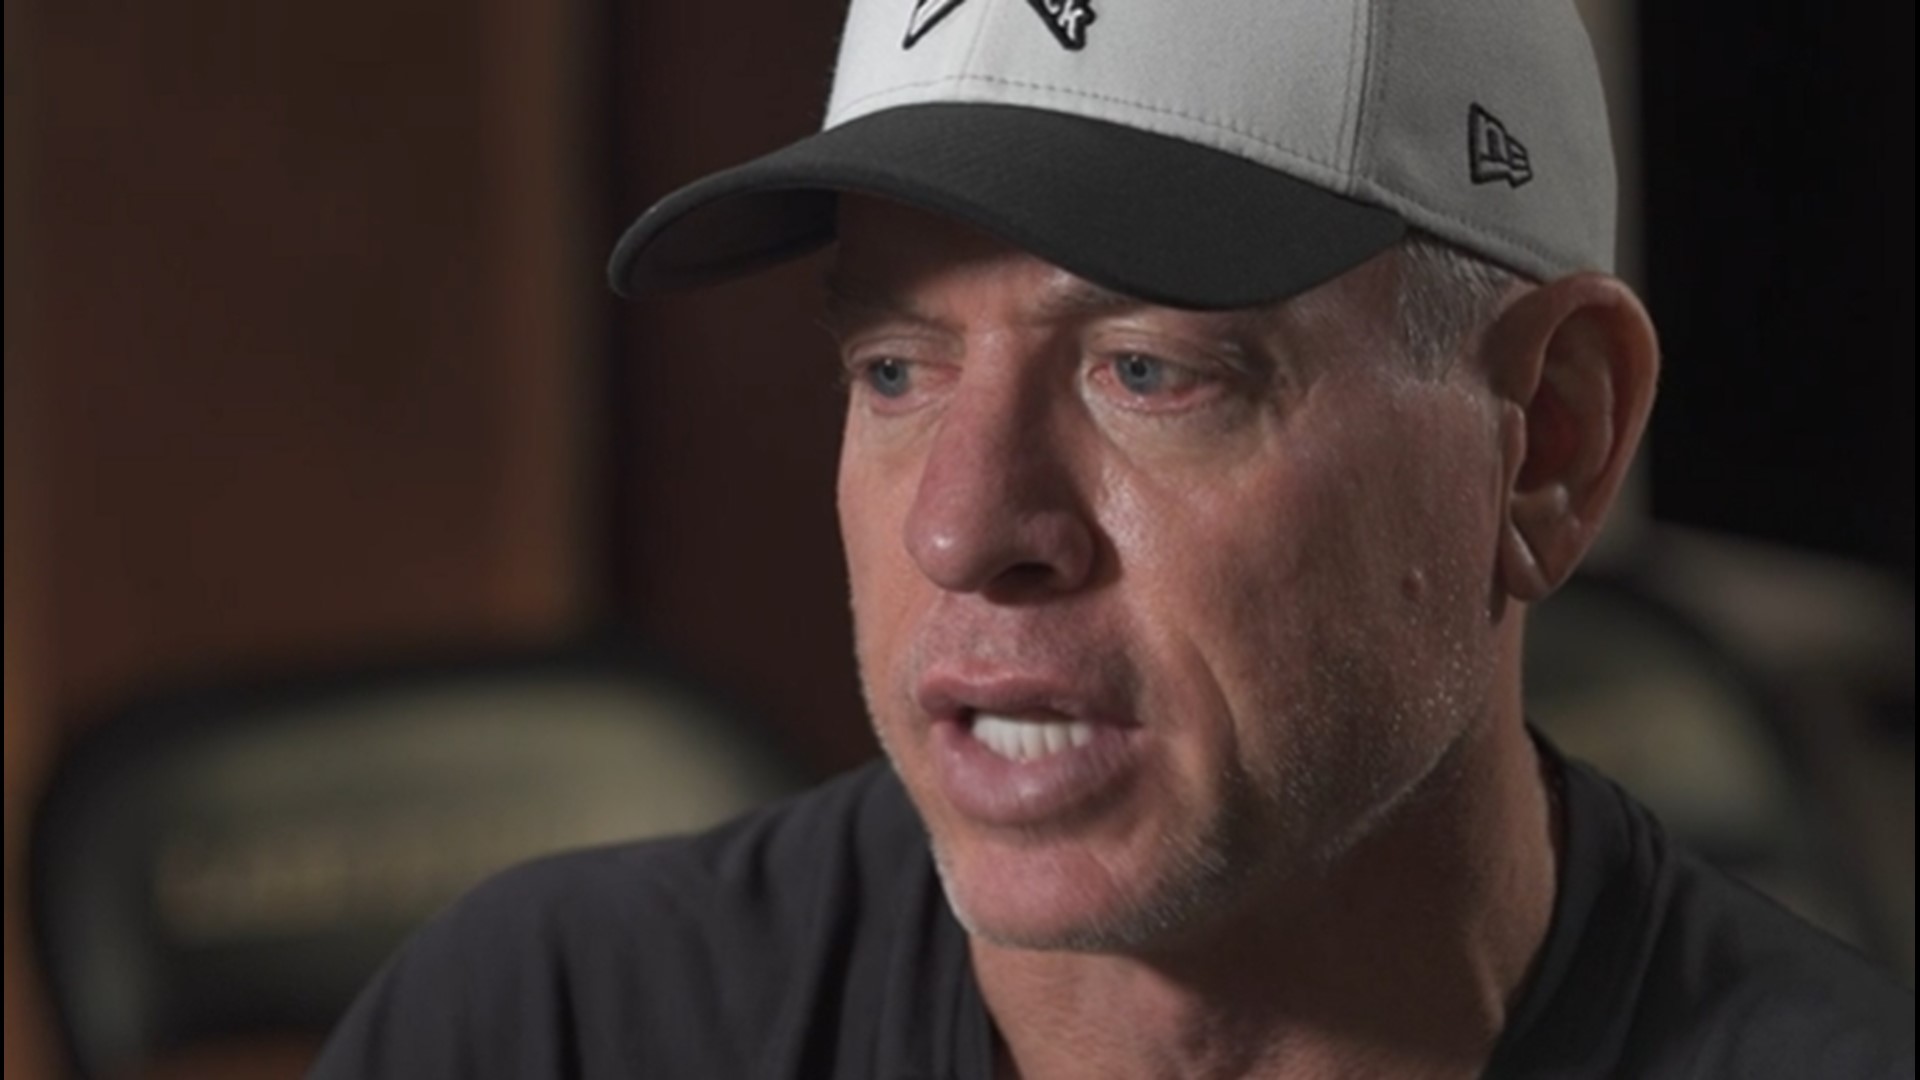 "He's the one who brings everybody together," Aikman said of Prescott.